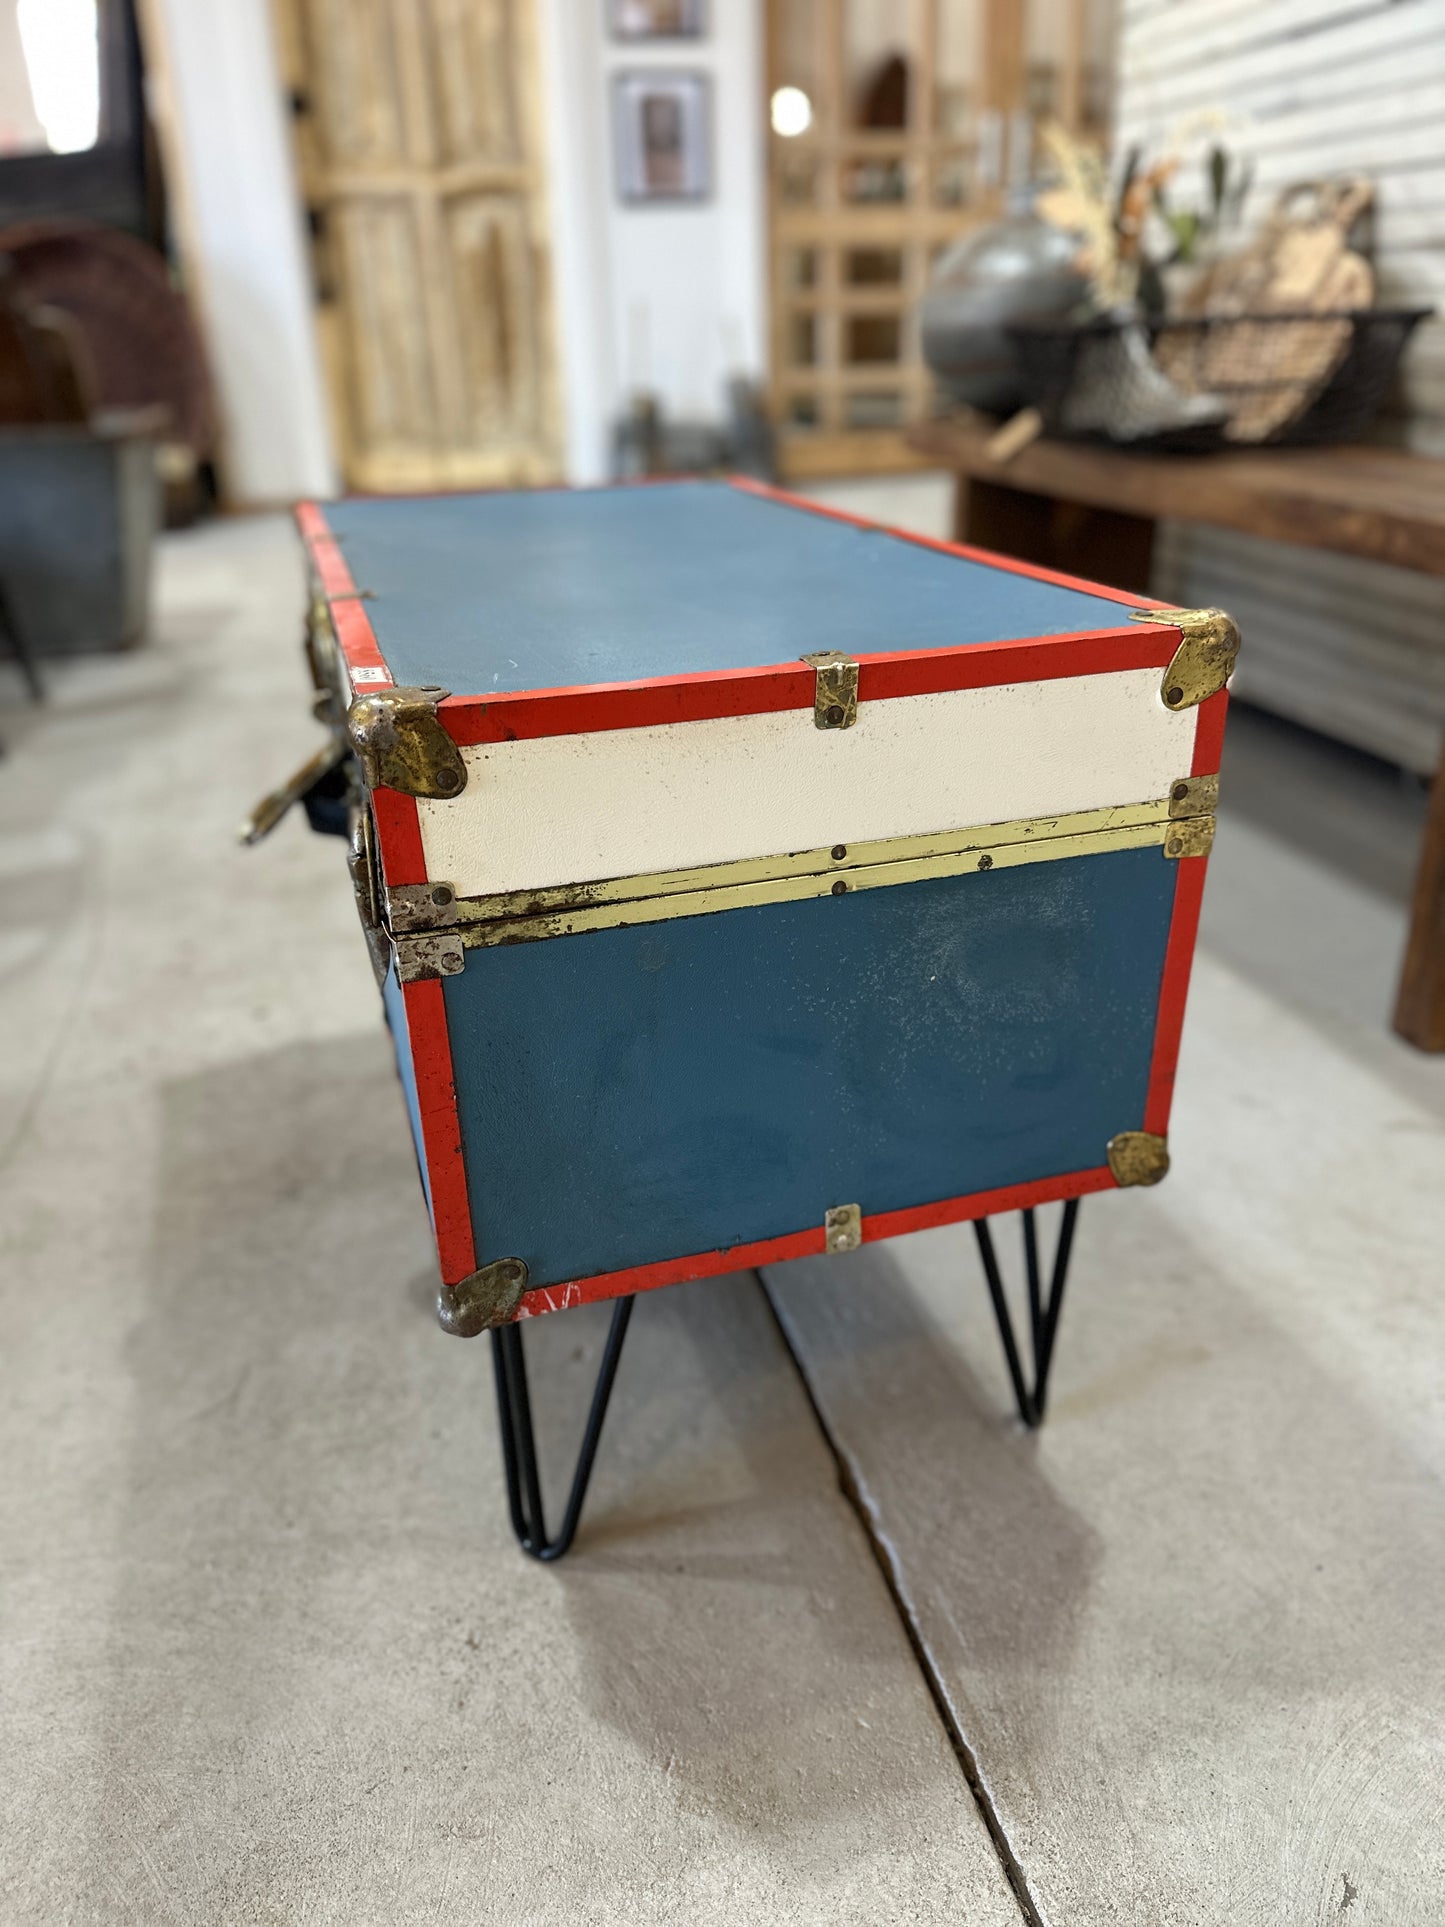 Red, White, and Blue Trunk Table